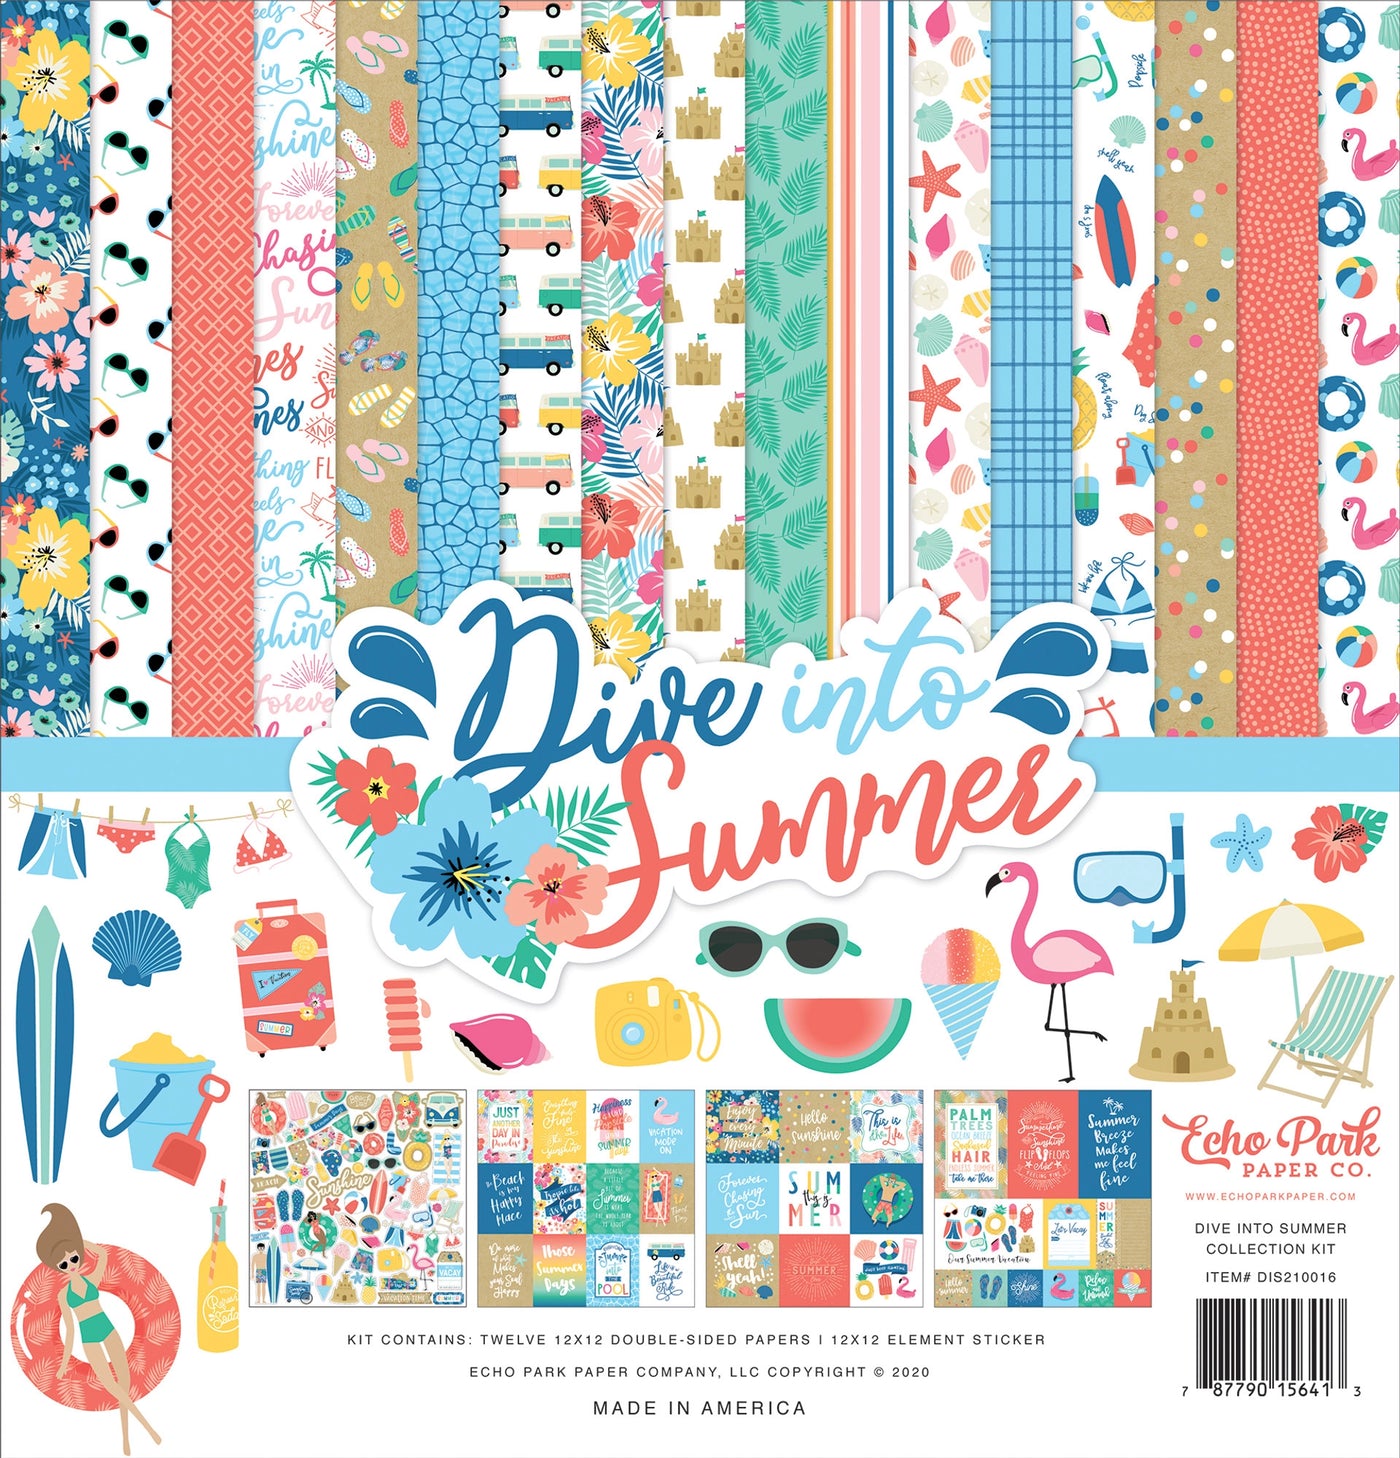 Kit contains twelve 12x12 double-sided papers plus a 12x12 element sticker: bright colors and a summer theme—archival quality and acid-free.